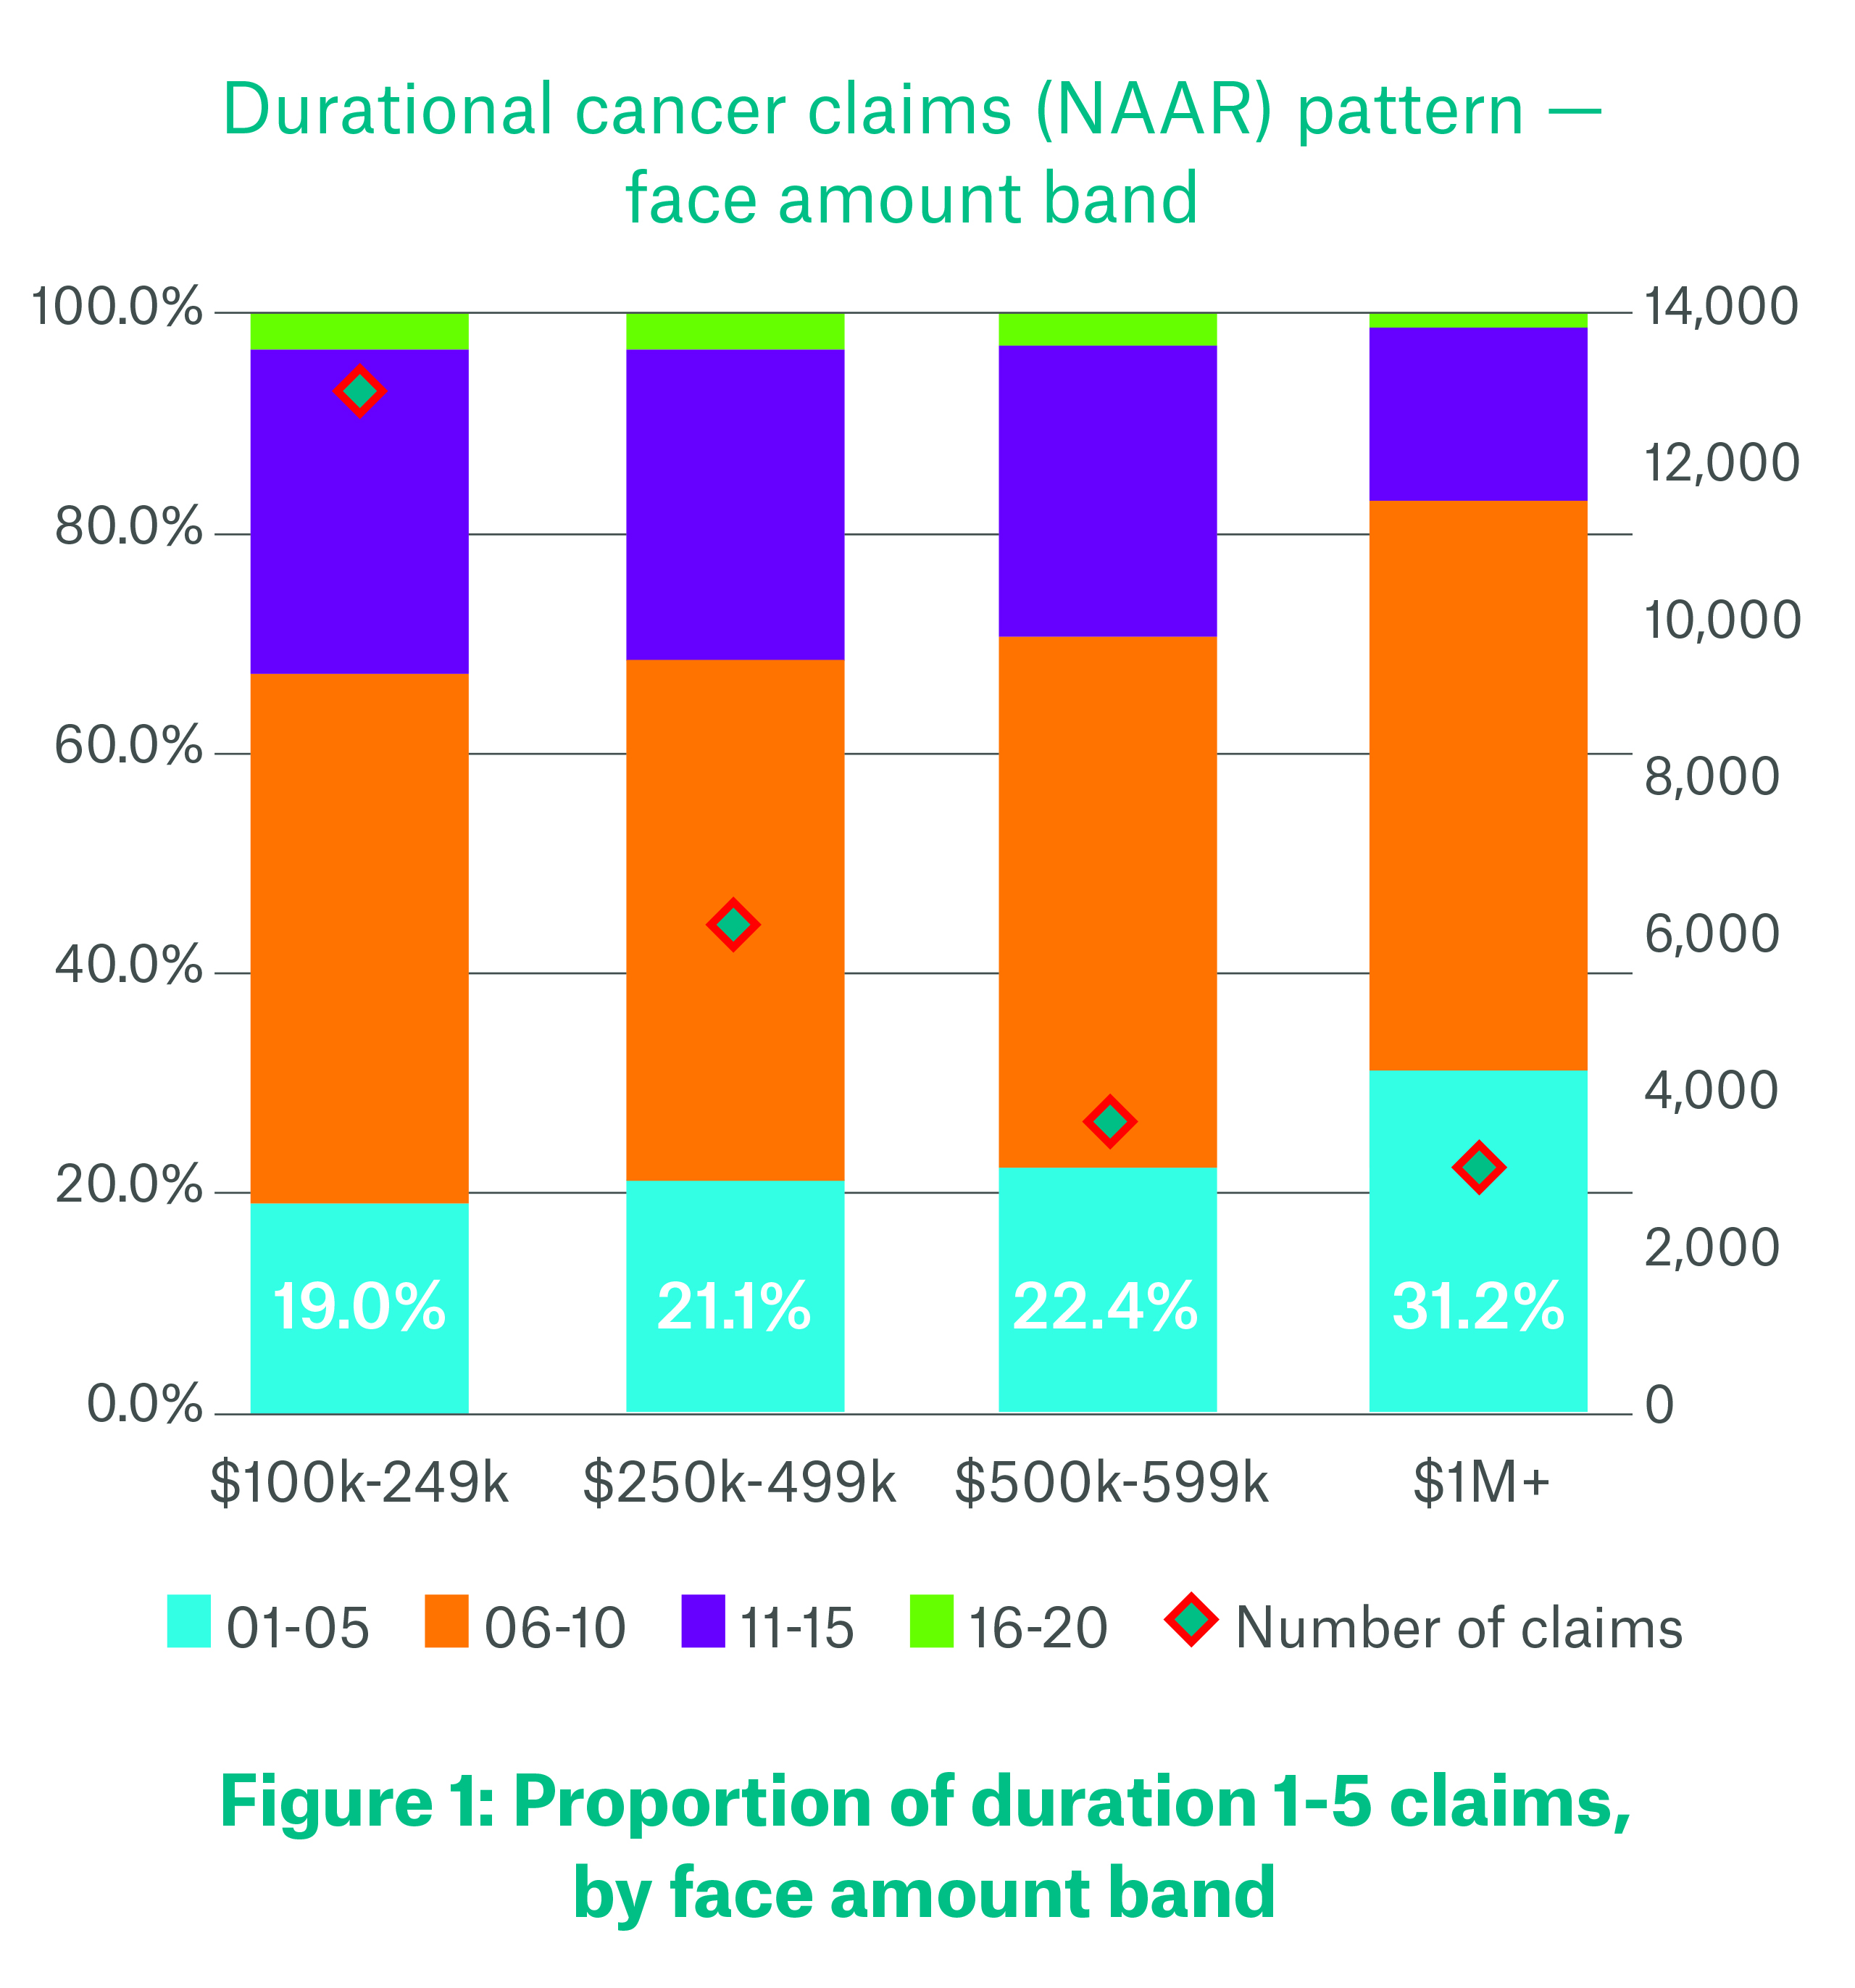 Figure 1 Proportion of duration 1-5 claims by face amount band